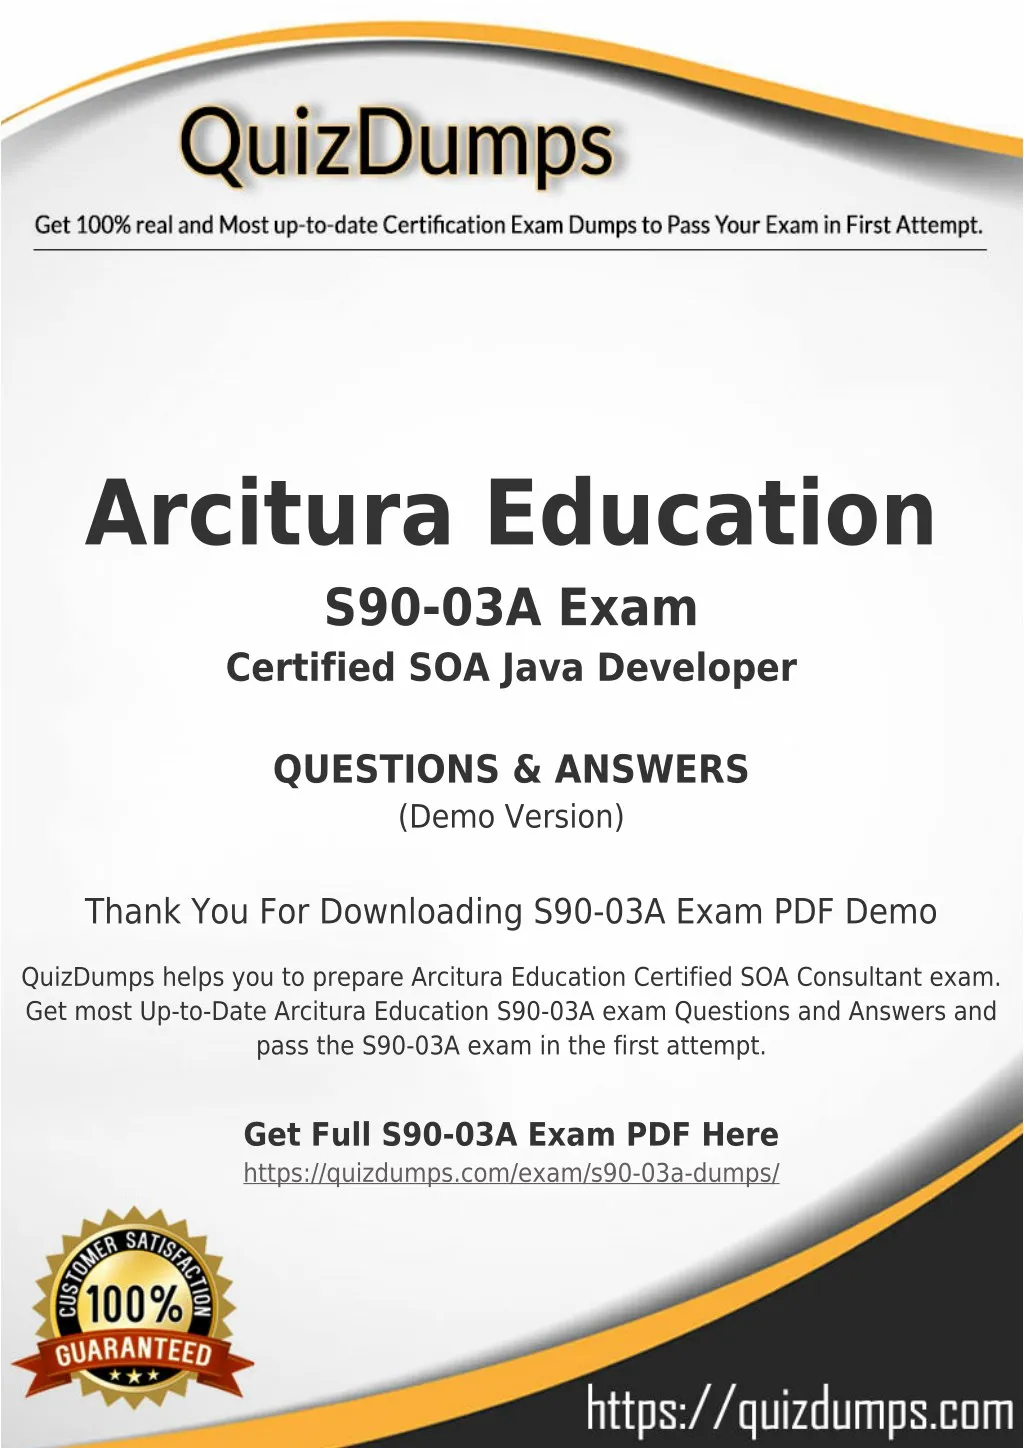 arcitura education s90 03a exam certified